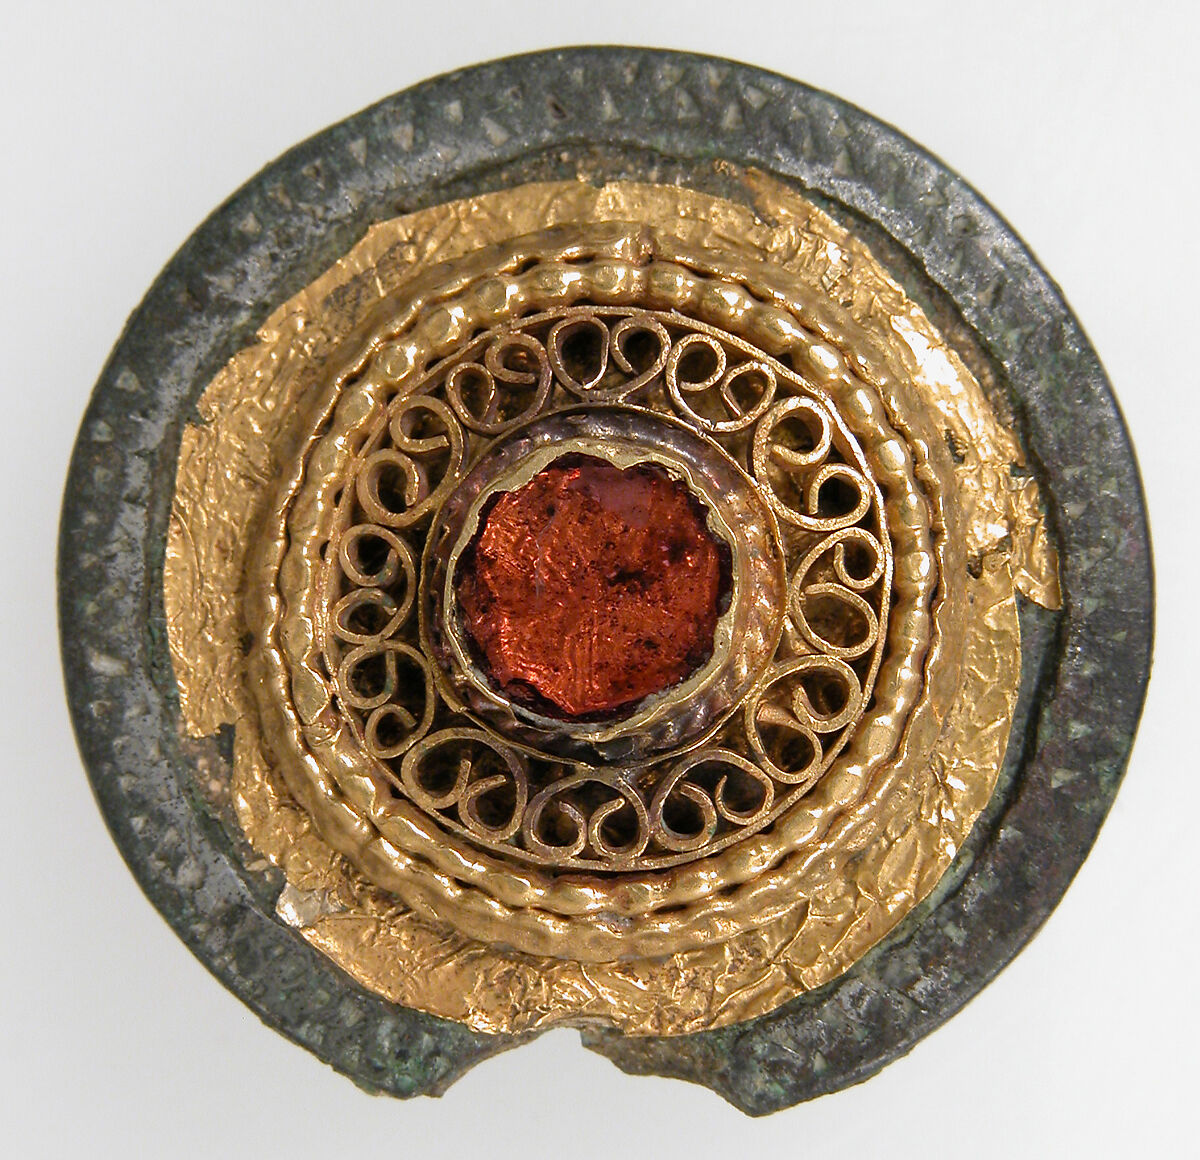 Disk Brooch, Copper alloy, silvered, gold, glass paste, Anglo-Saxon 